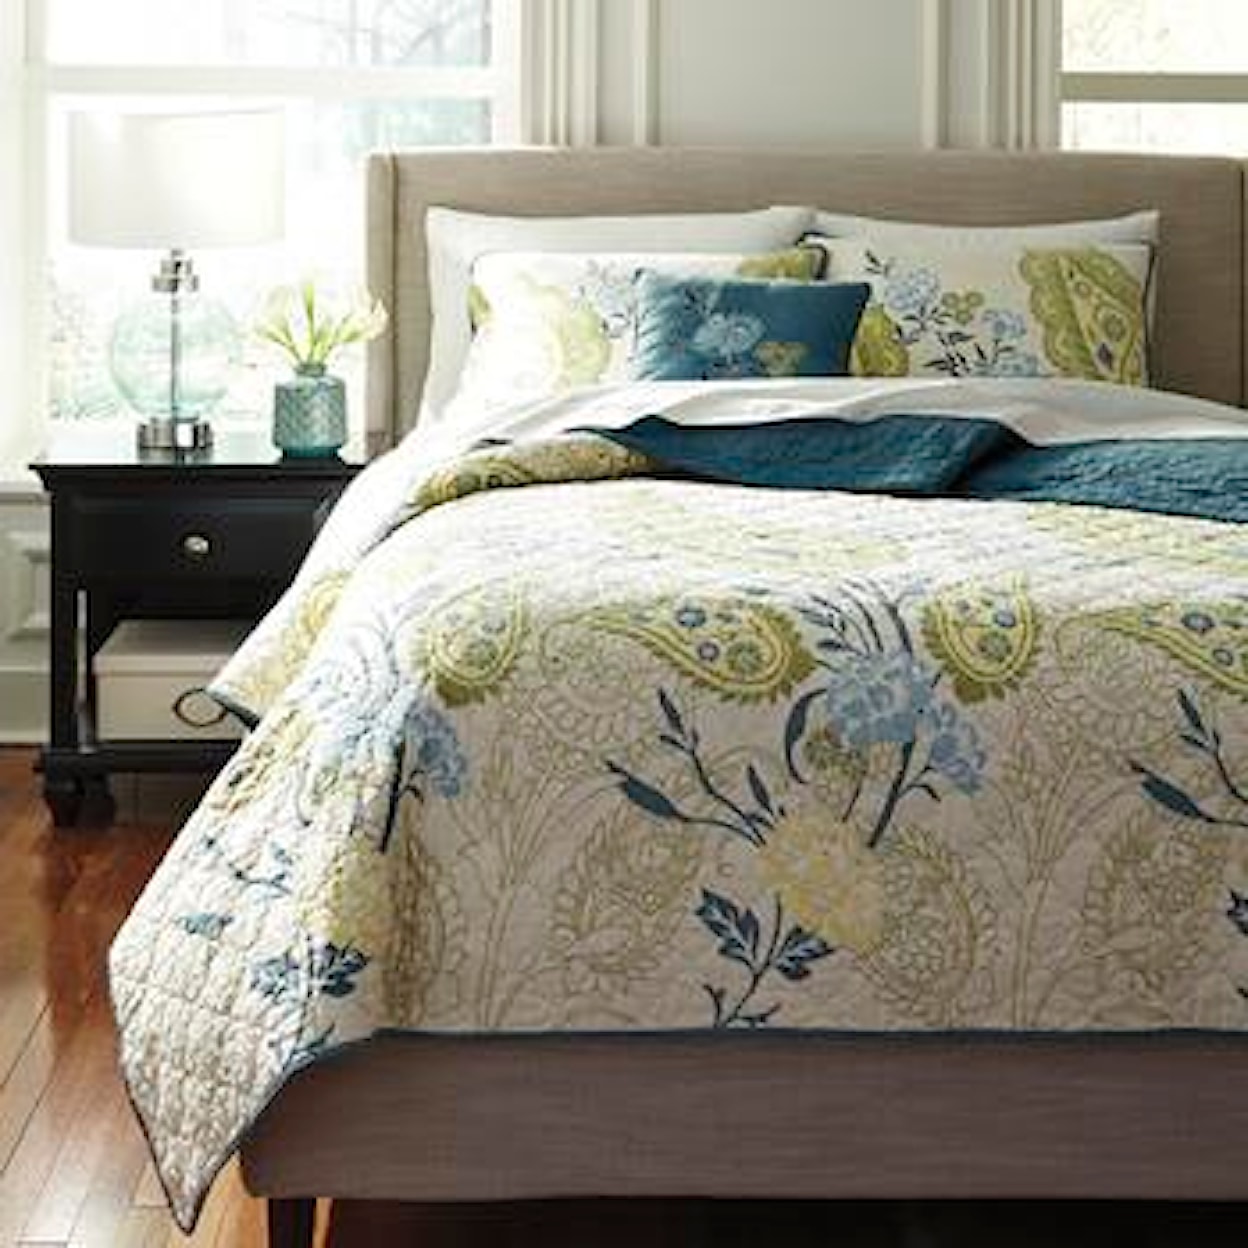 Signature Design by Ashley Bedding Sets Queen Paislette Quilt Teal Top of Bed Set